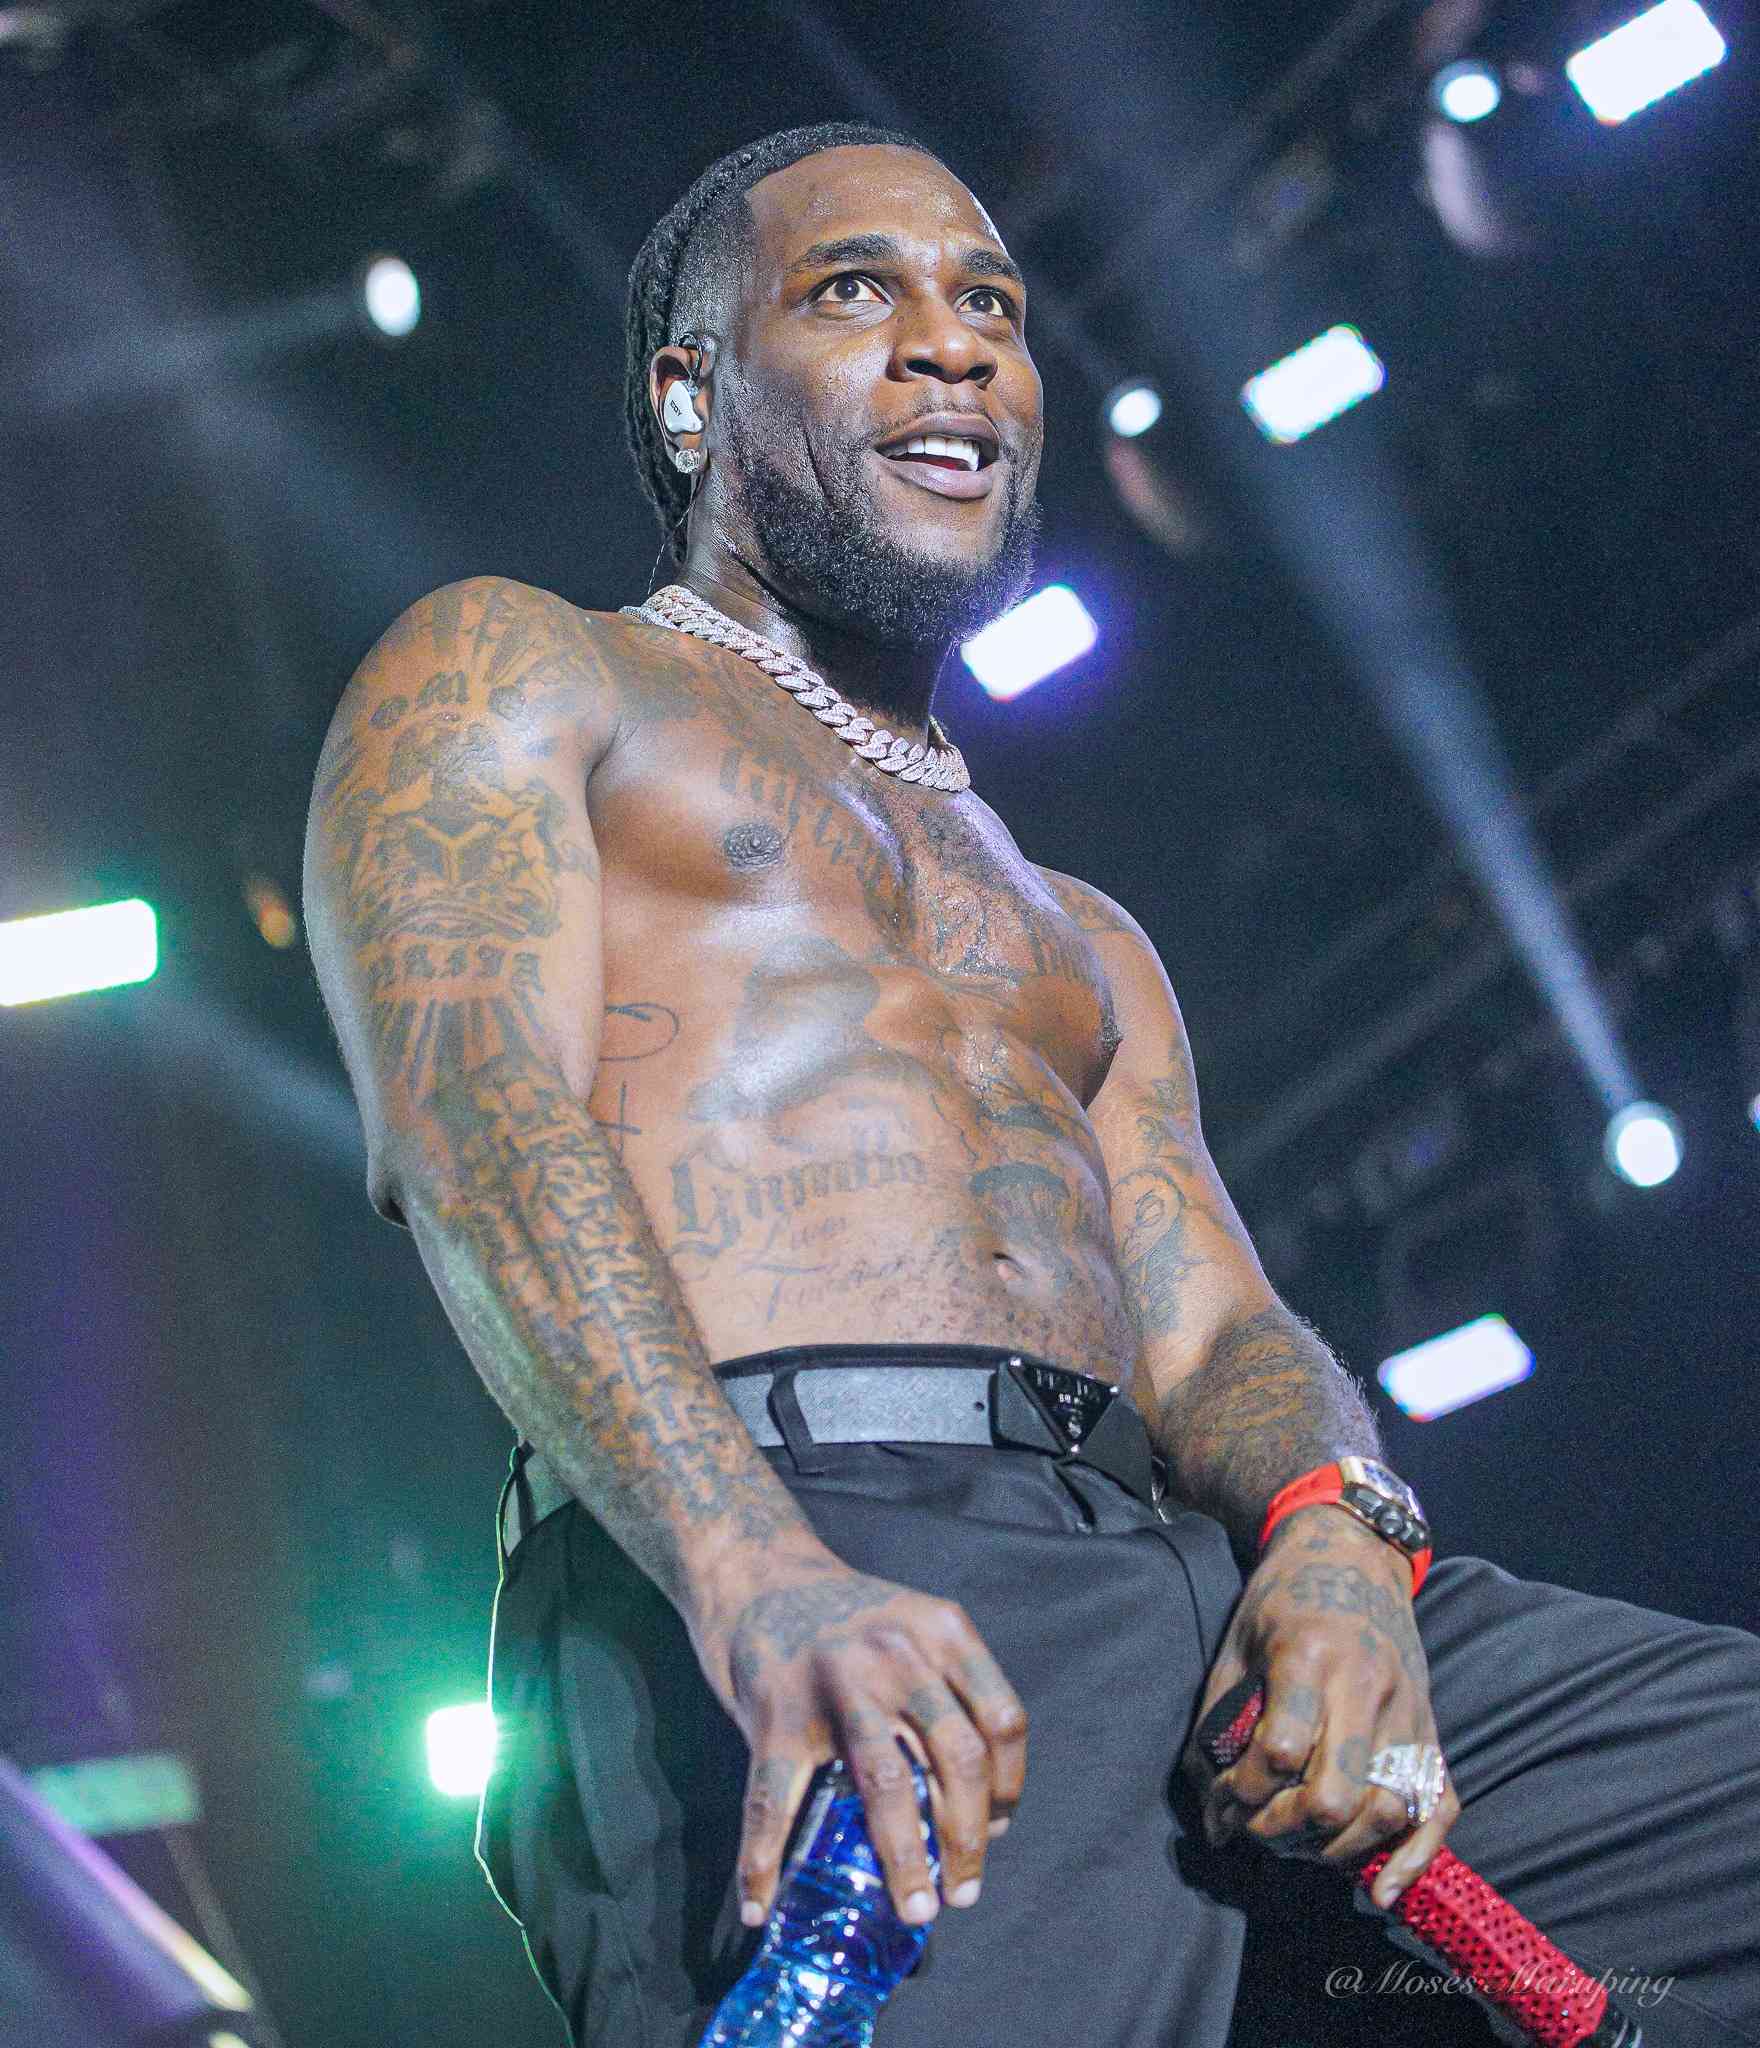 Burna Boy with an epic perfomance